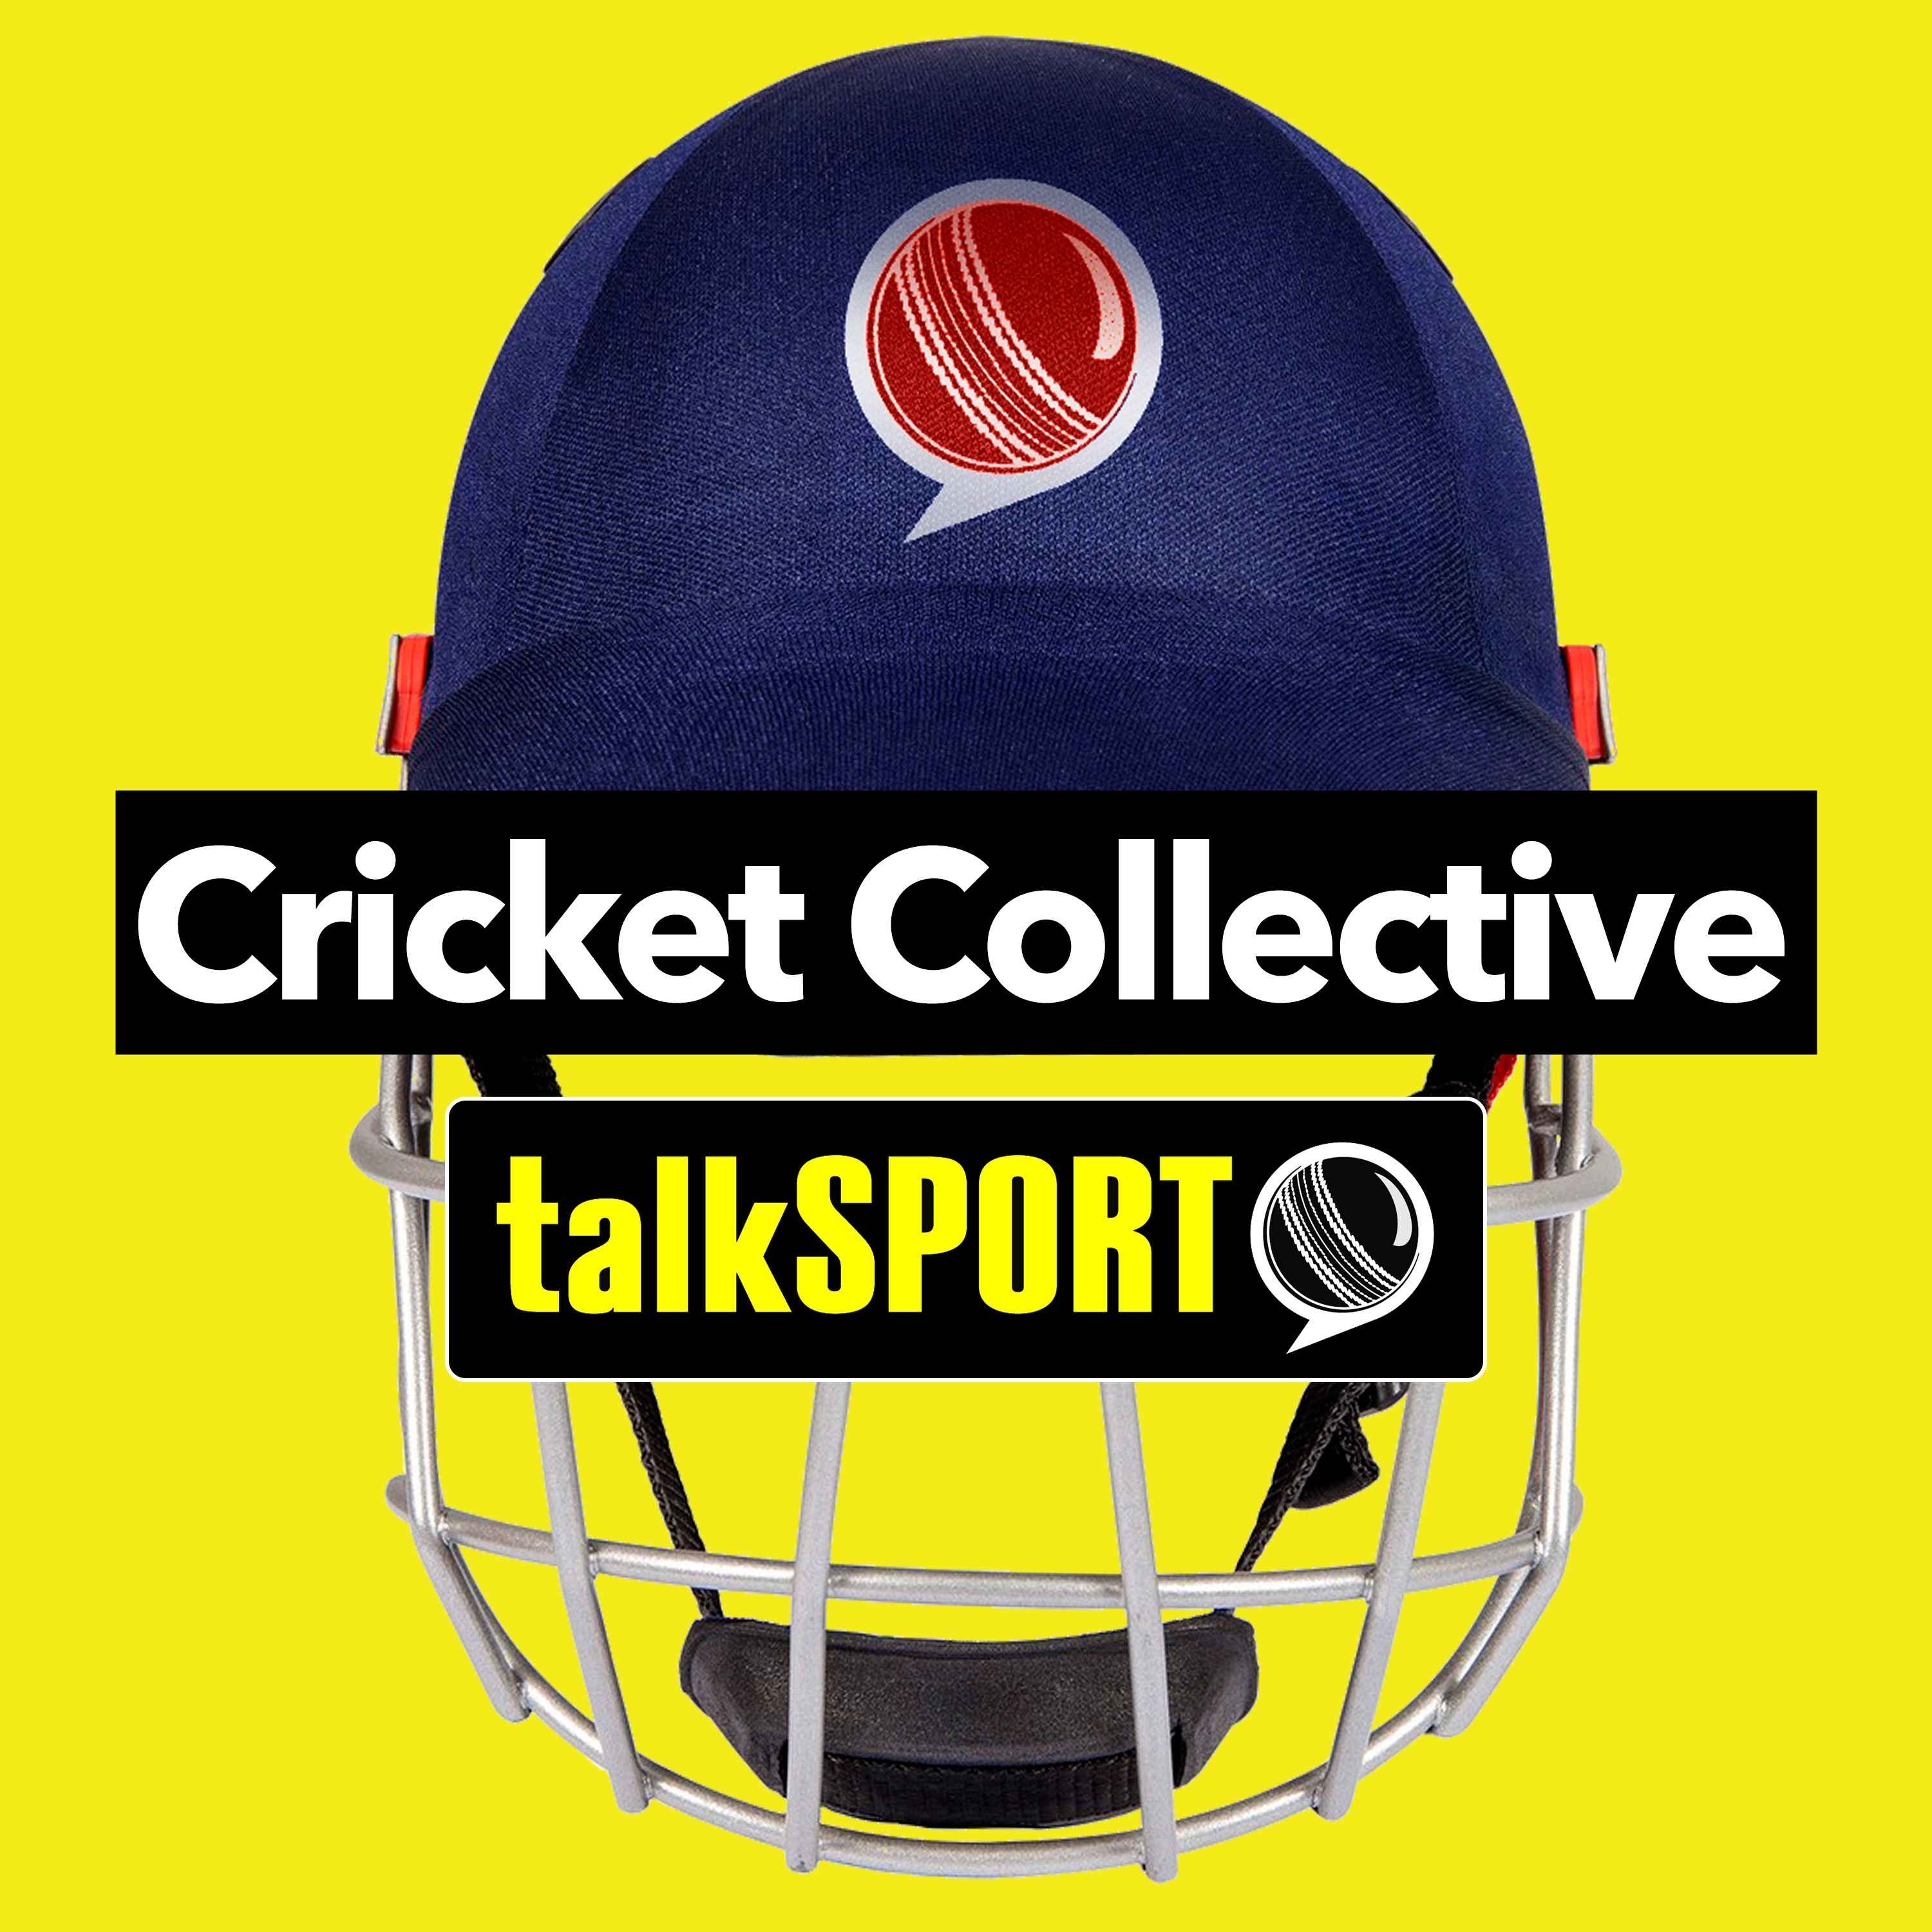 The Cricket Collective - Broad's Dream Farewell As Ashes Comes To Thrilling Conclusion!